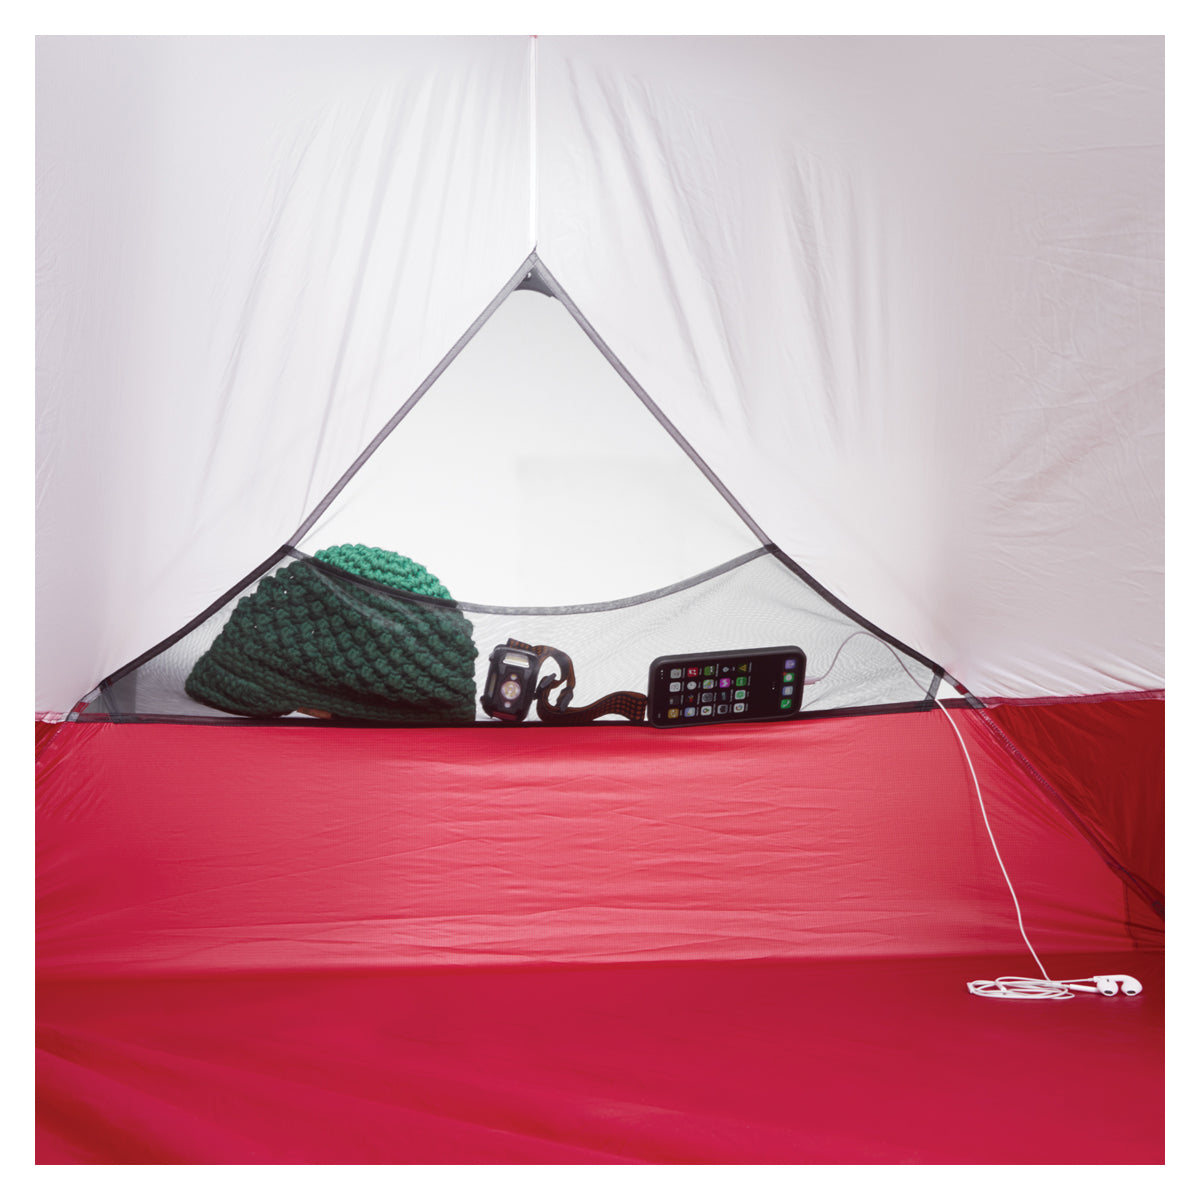 MSR Hubba Hubba 3 Person Tent in  by GOHUNT | MSR - GOHUNT Shop